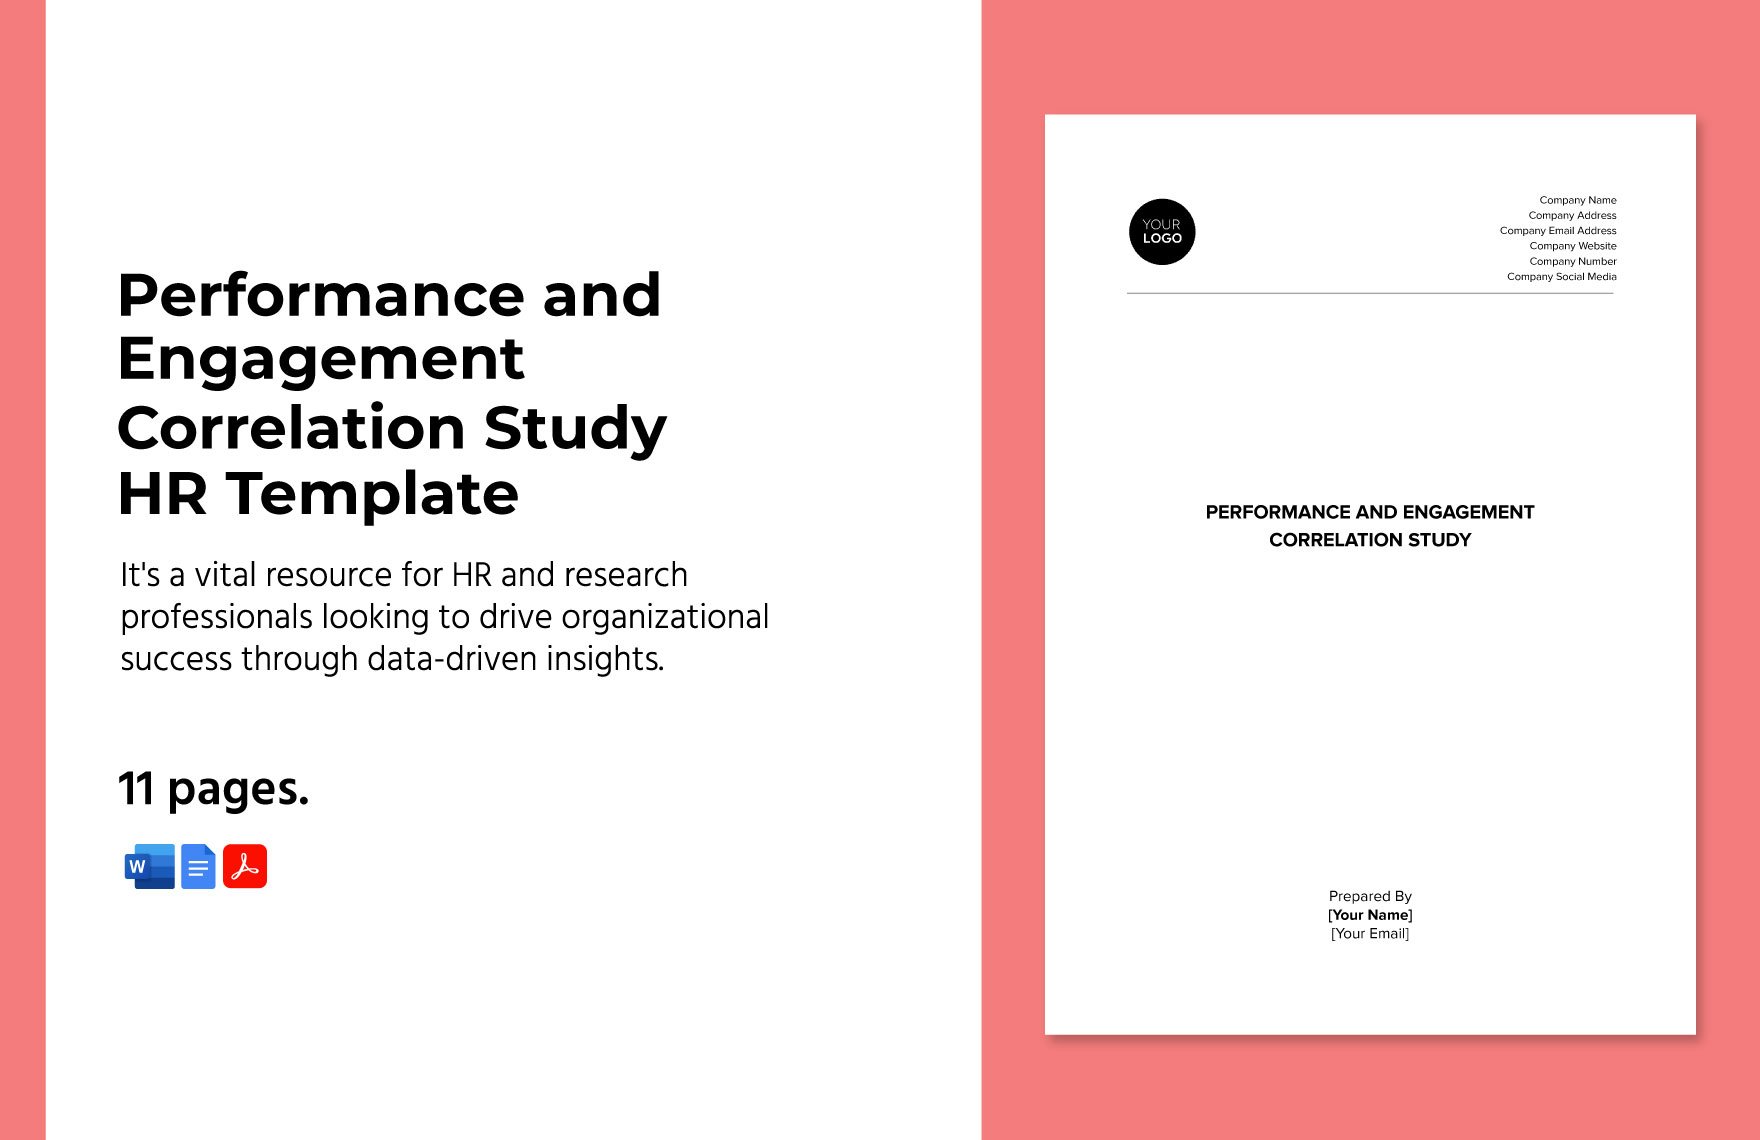 Performance and Engagement Correlation Study HR Template in Word, Google Docs, PDF